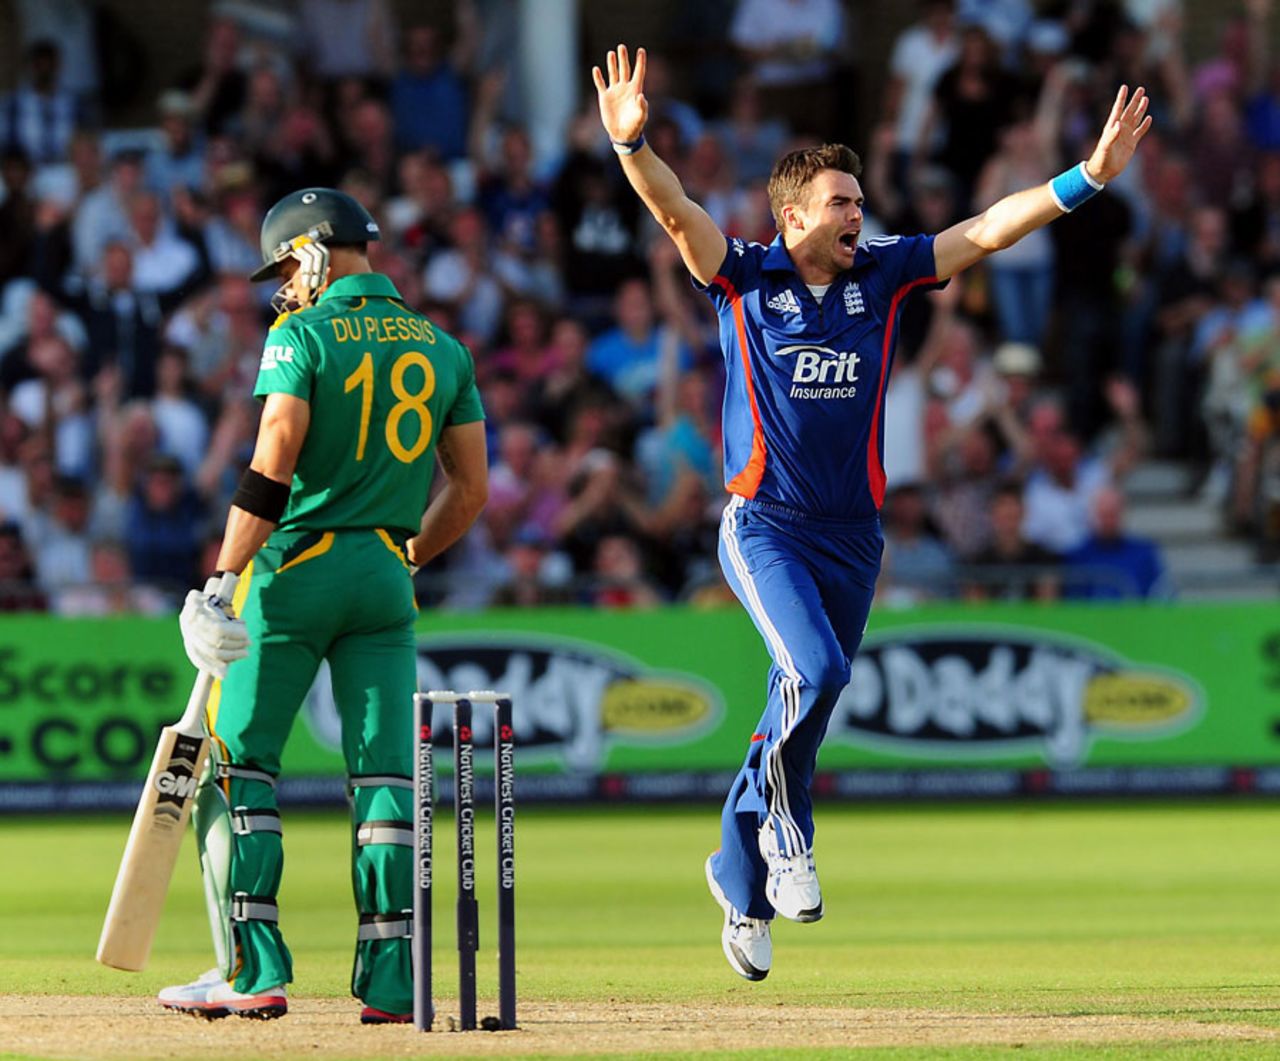 James Anderson removed Faf du Plessis in a rampant opening spell, England v South Africa, 5th NatWest ODI, Trent Bridge, September, 5, 2012